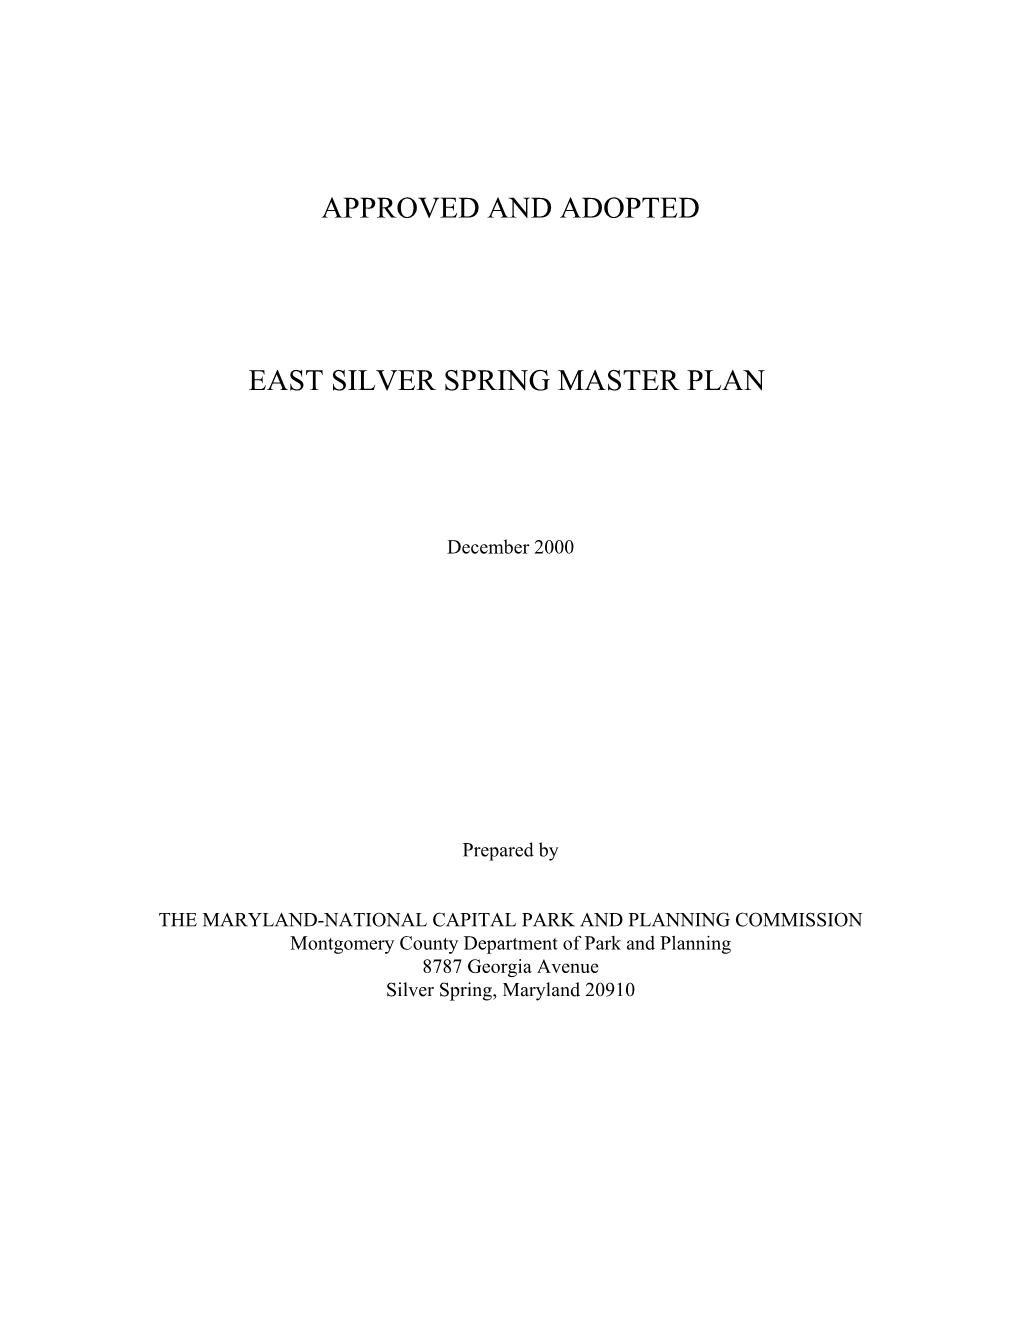 Approved and Adopted East Silver Spring Master Plan